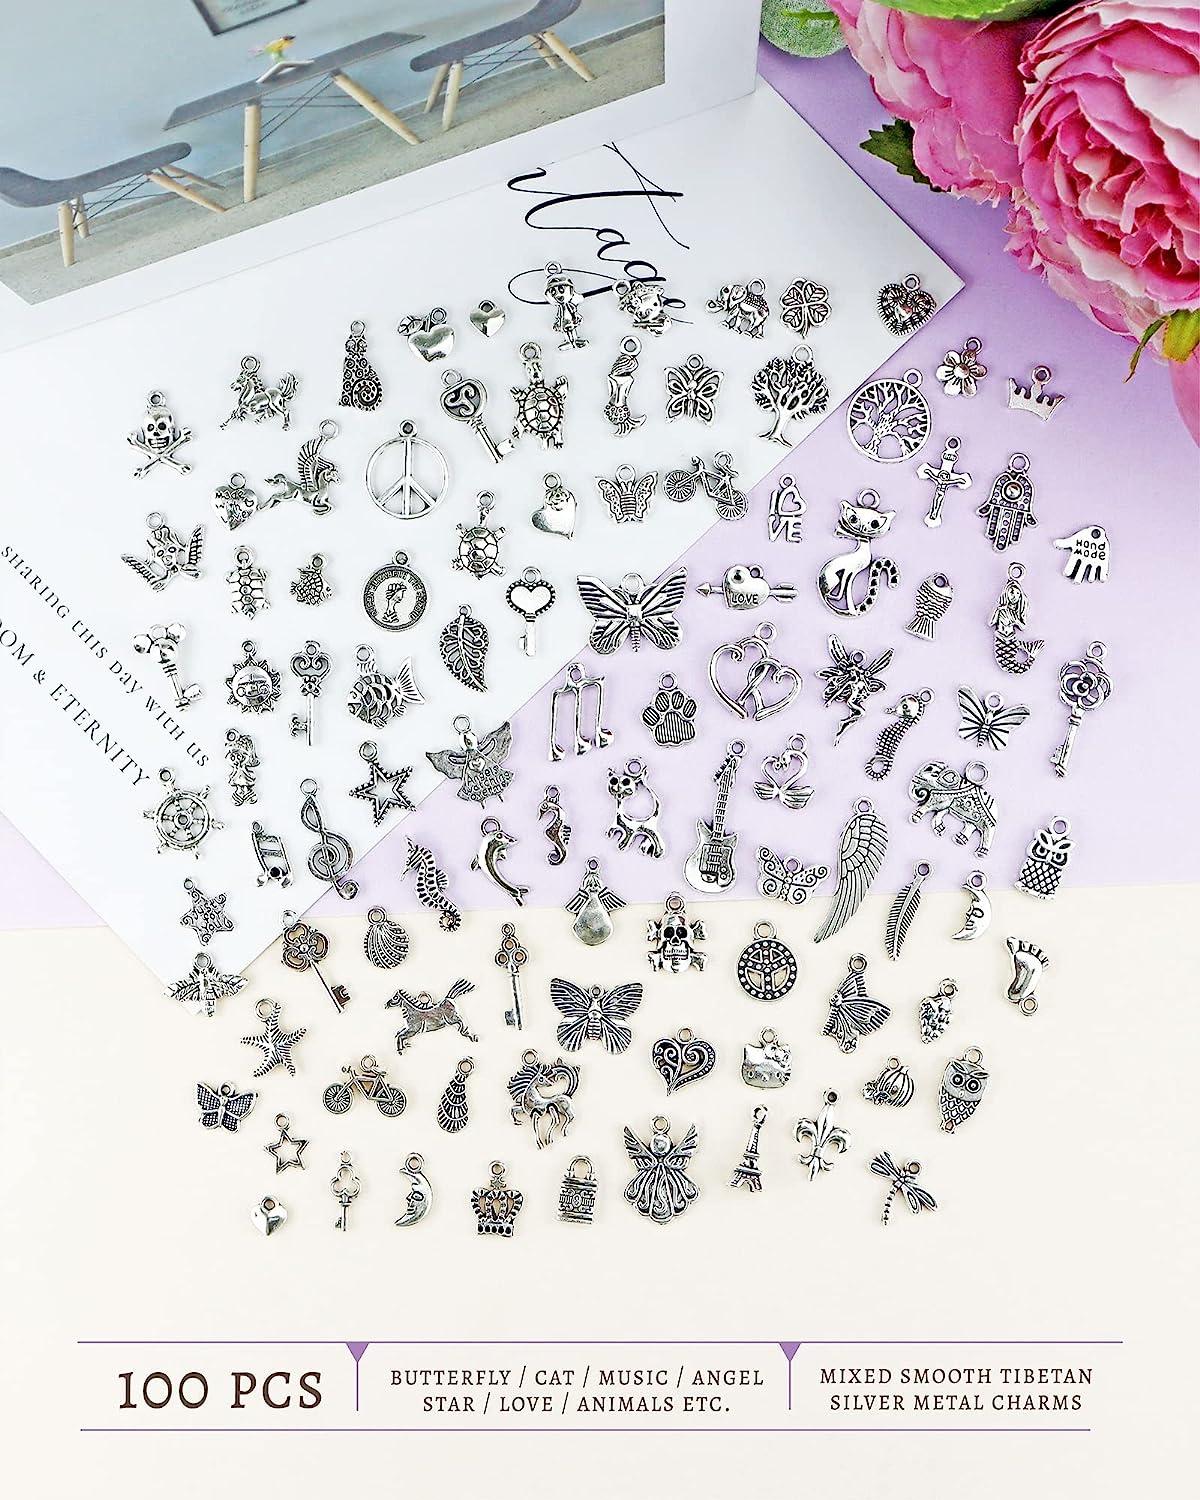 JIALEEY 300 PCS Wholesale Bulk Lots Jewelry Making Charms Mixed Smooth  Tibetan Silver Alloy Charms Pendants DIY for Bracelet Necklace Jewelry  Making and Crafting